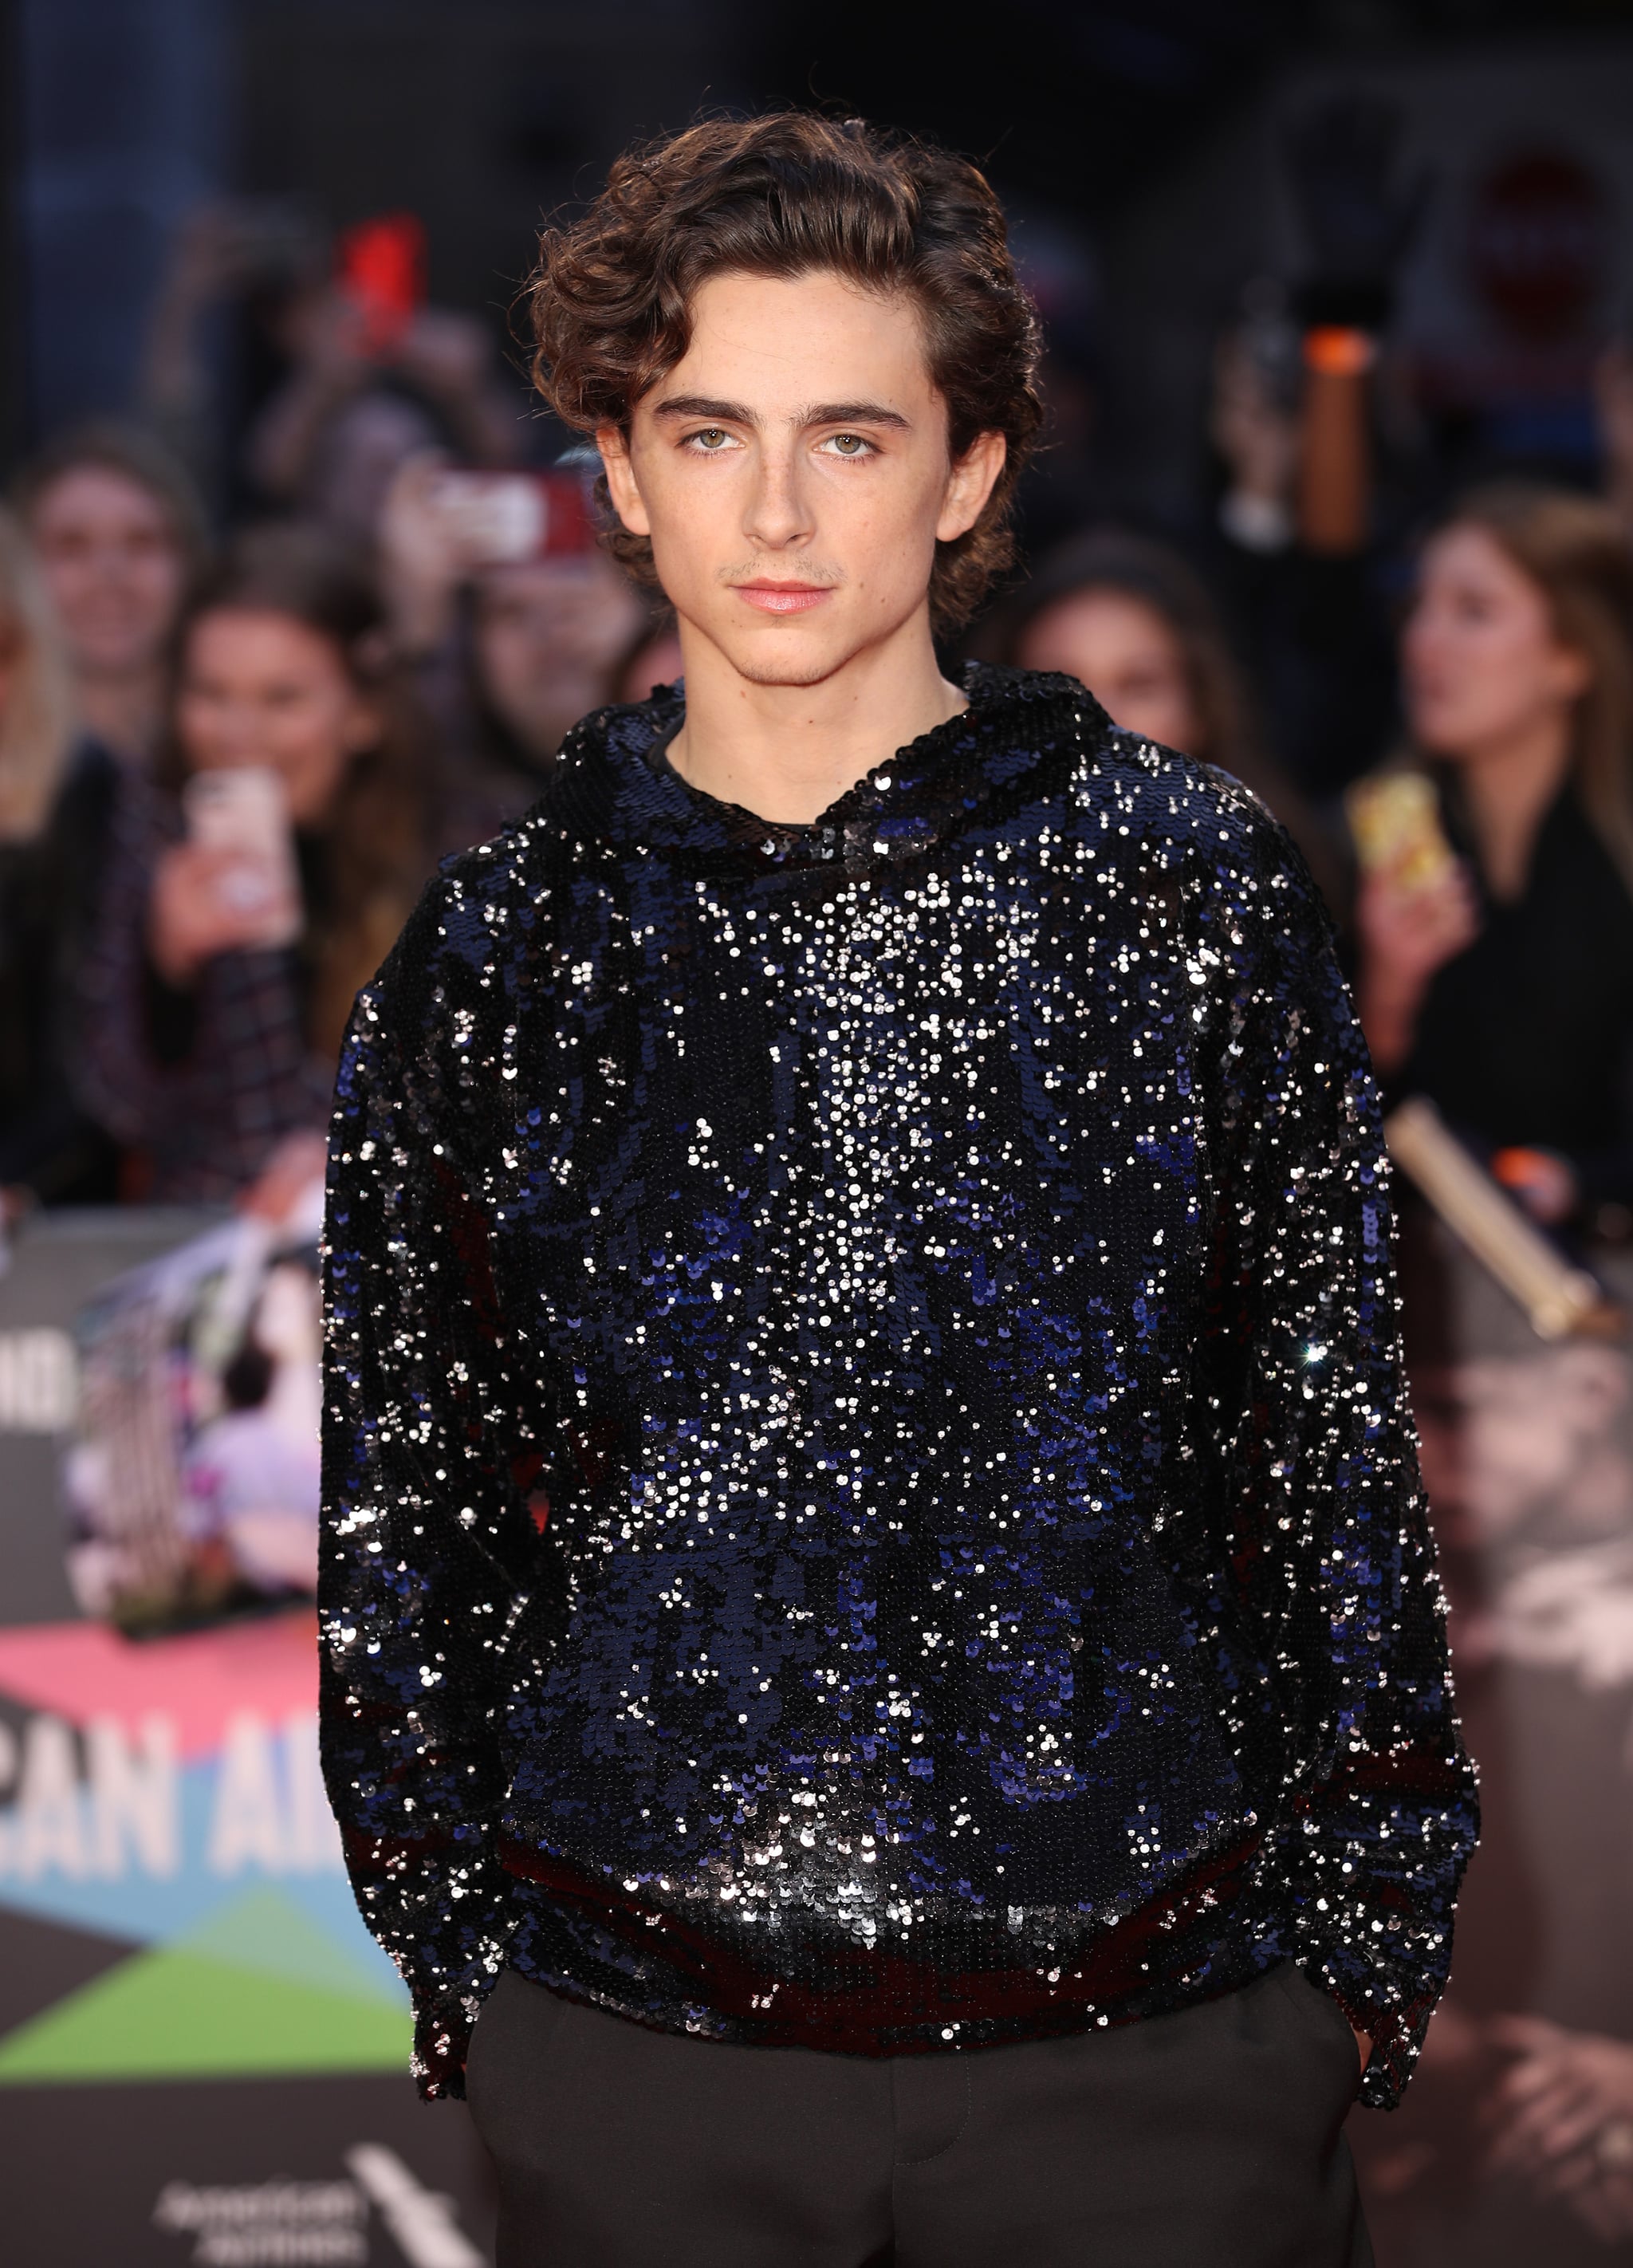 Timothée Chalamet Shakes up the Red Carpet with a High-Fashion Hoodie